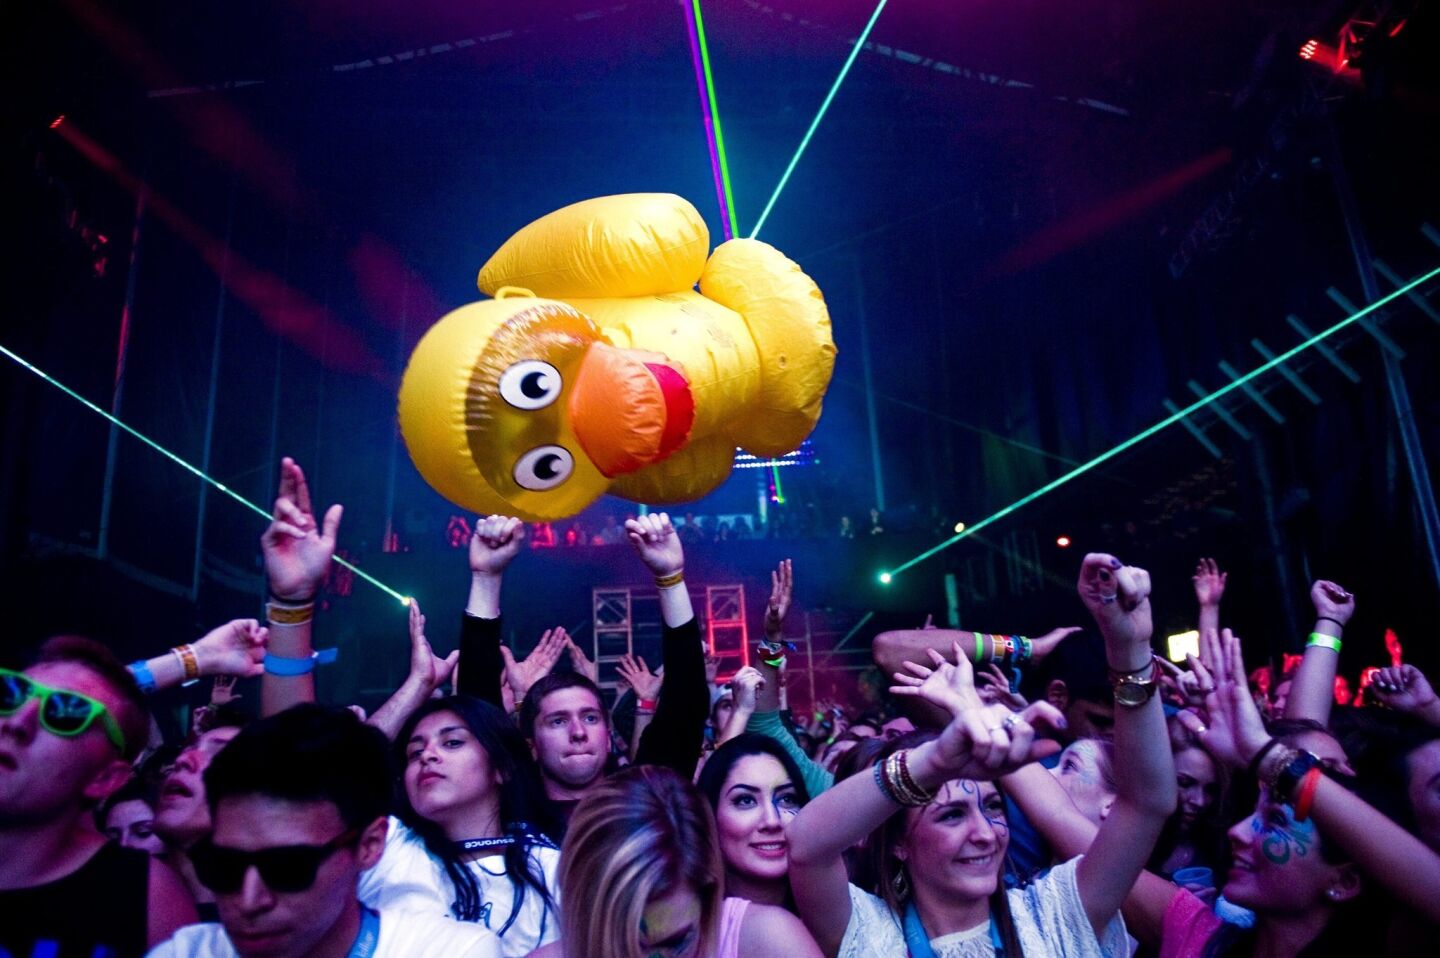 A giant inflatable duck is batteed around by fans as the Los Angeles-based hip-hop band Far East Movement performs at the Doritos' Bold Stage.